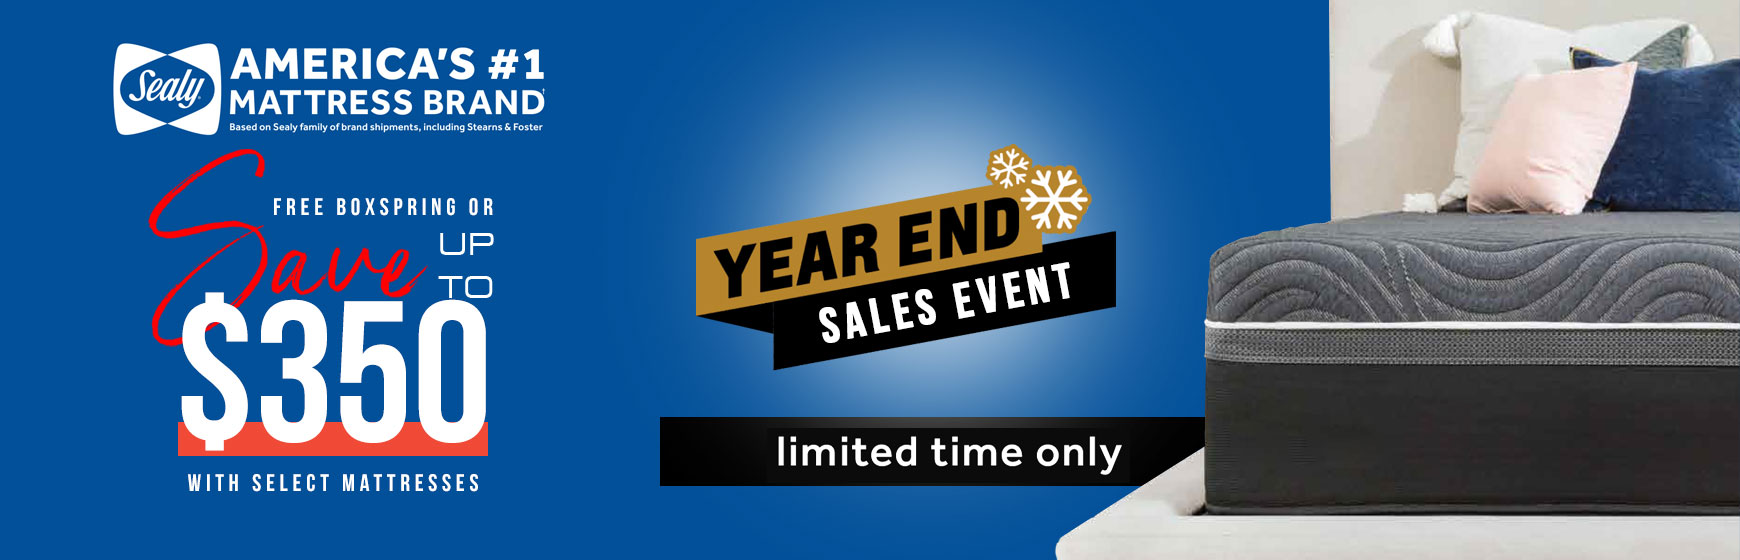 Sealy Year End Sales Event